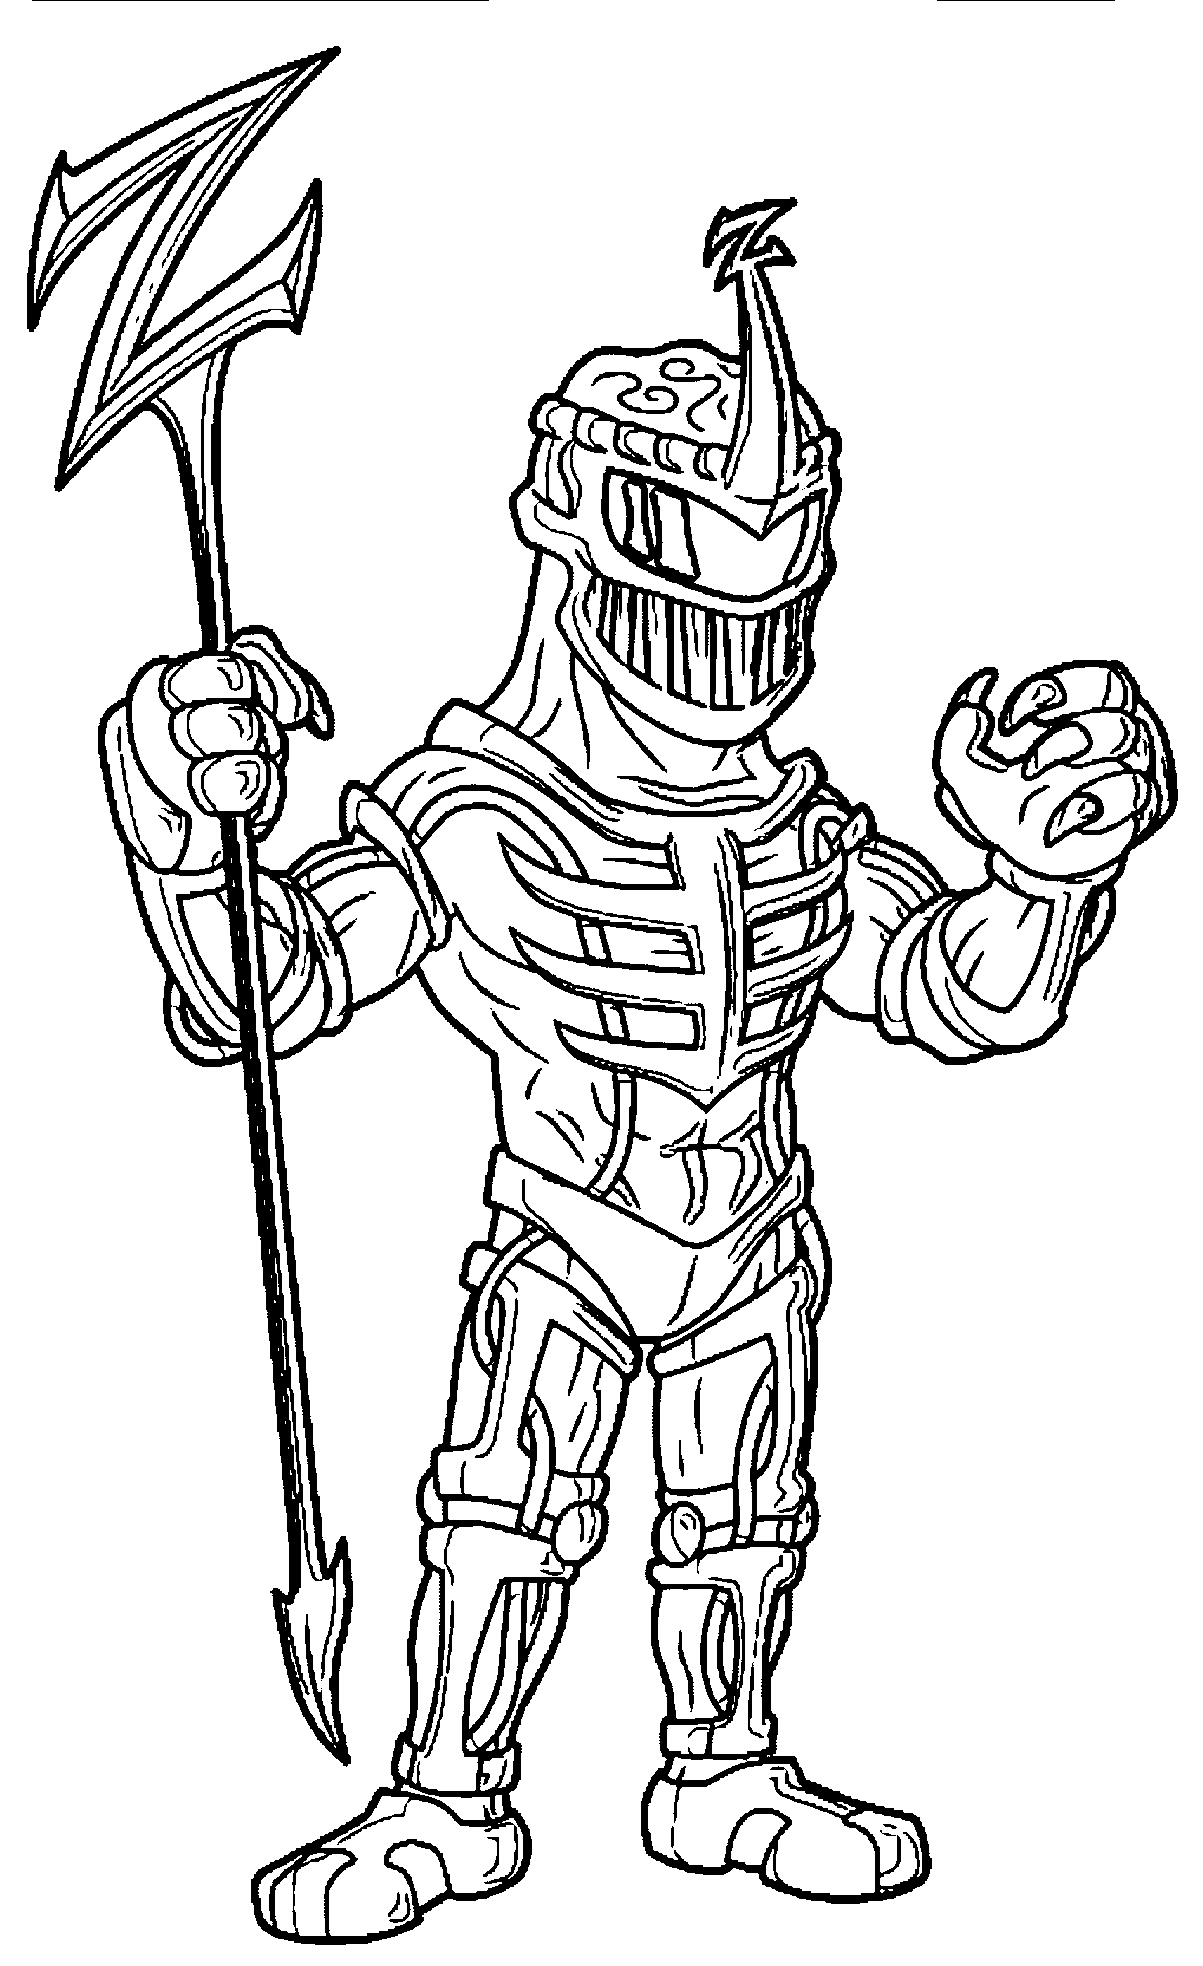 Mighty Morphin Power Rangers Coloring Pages fasrsoul